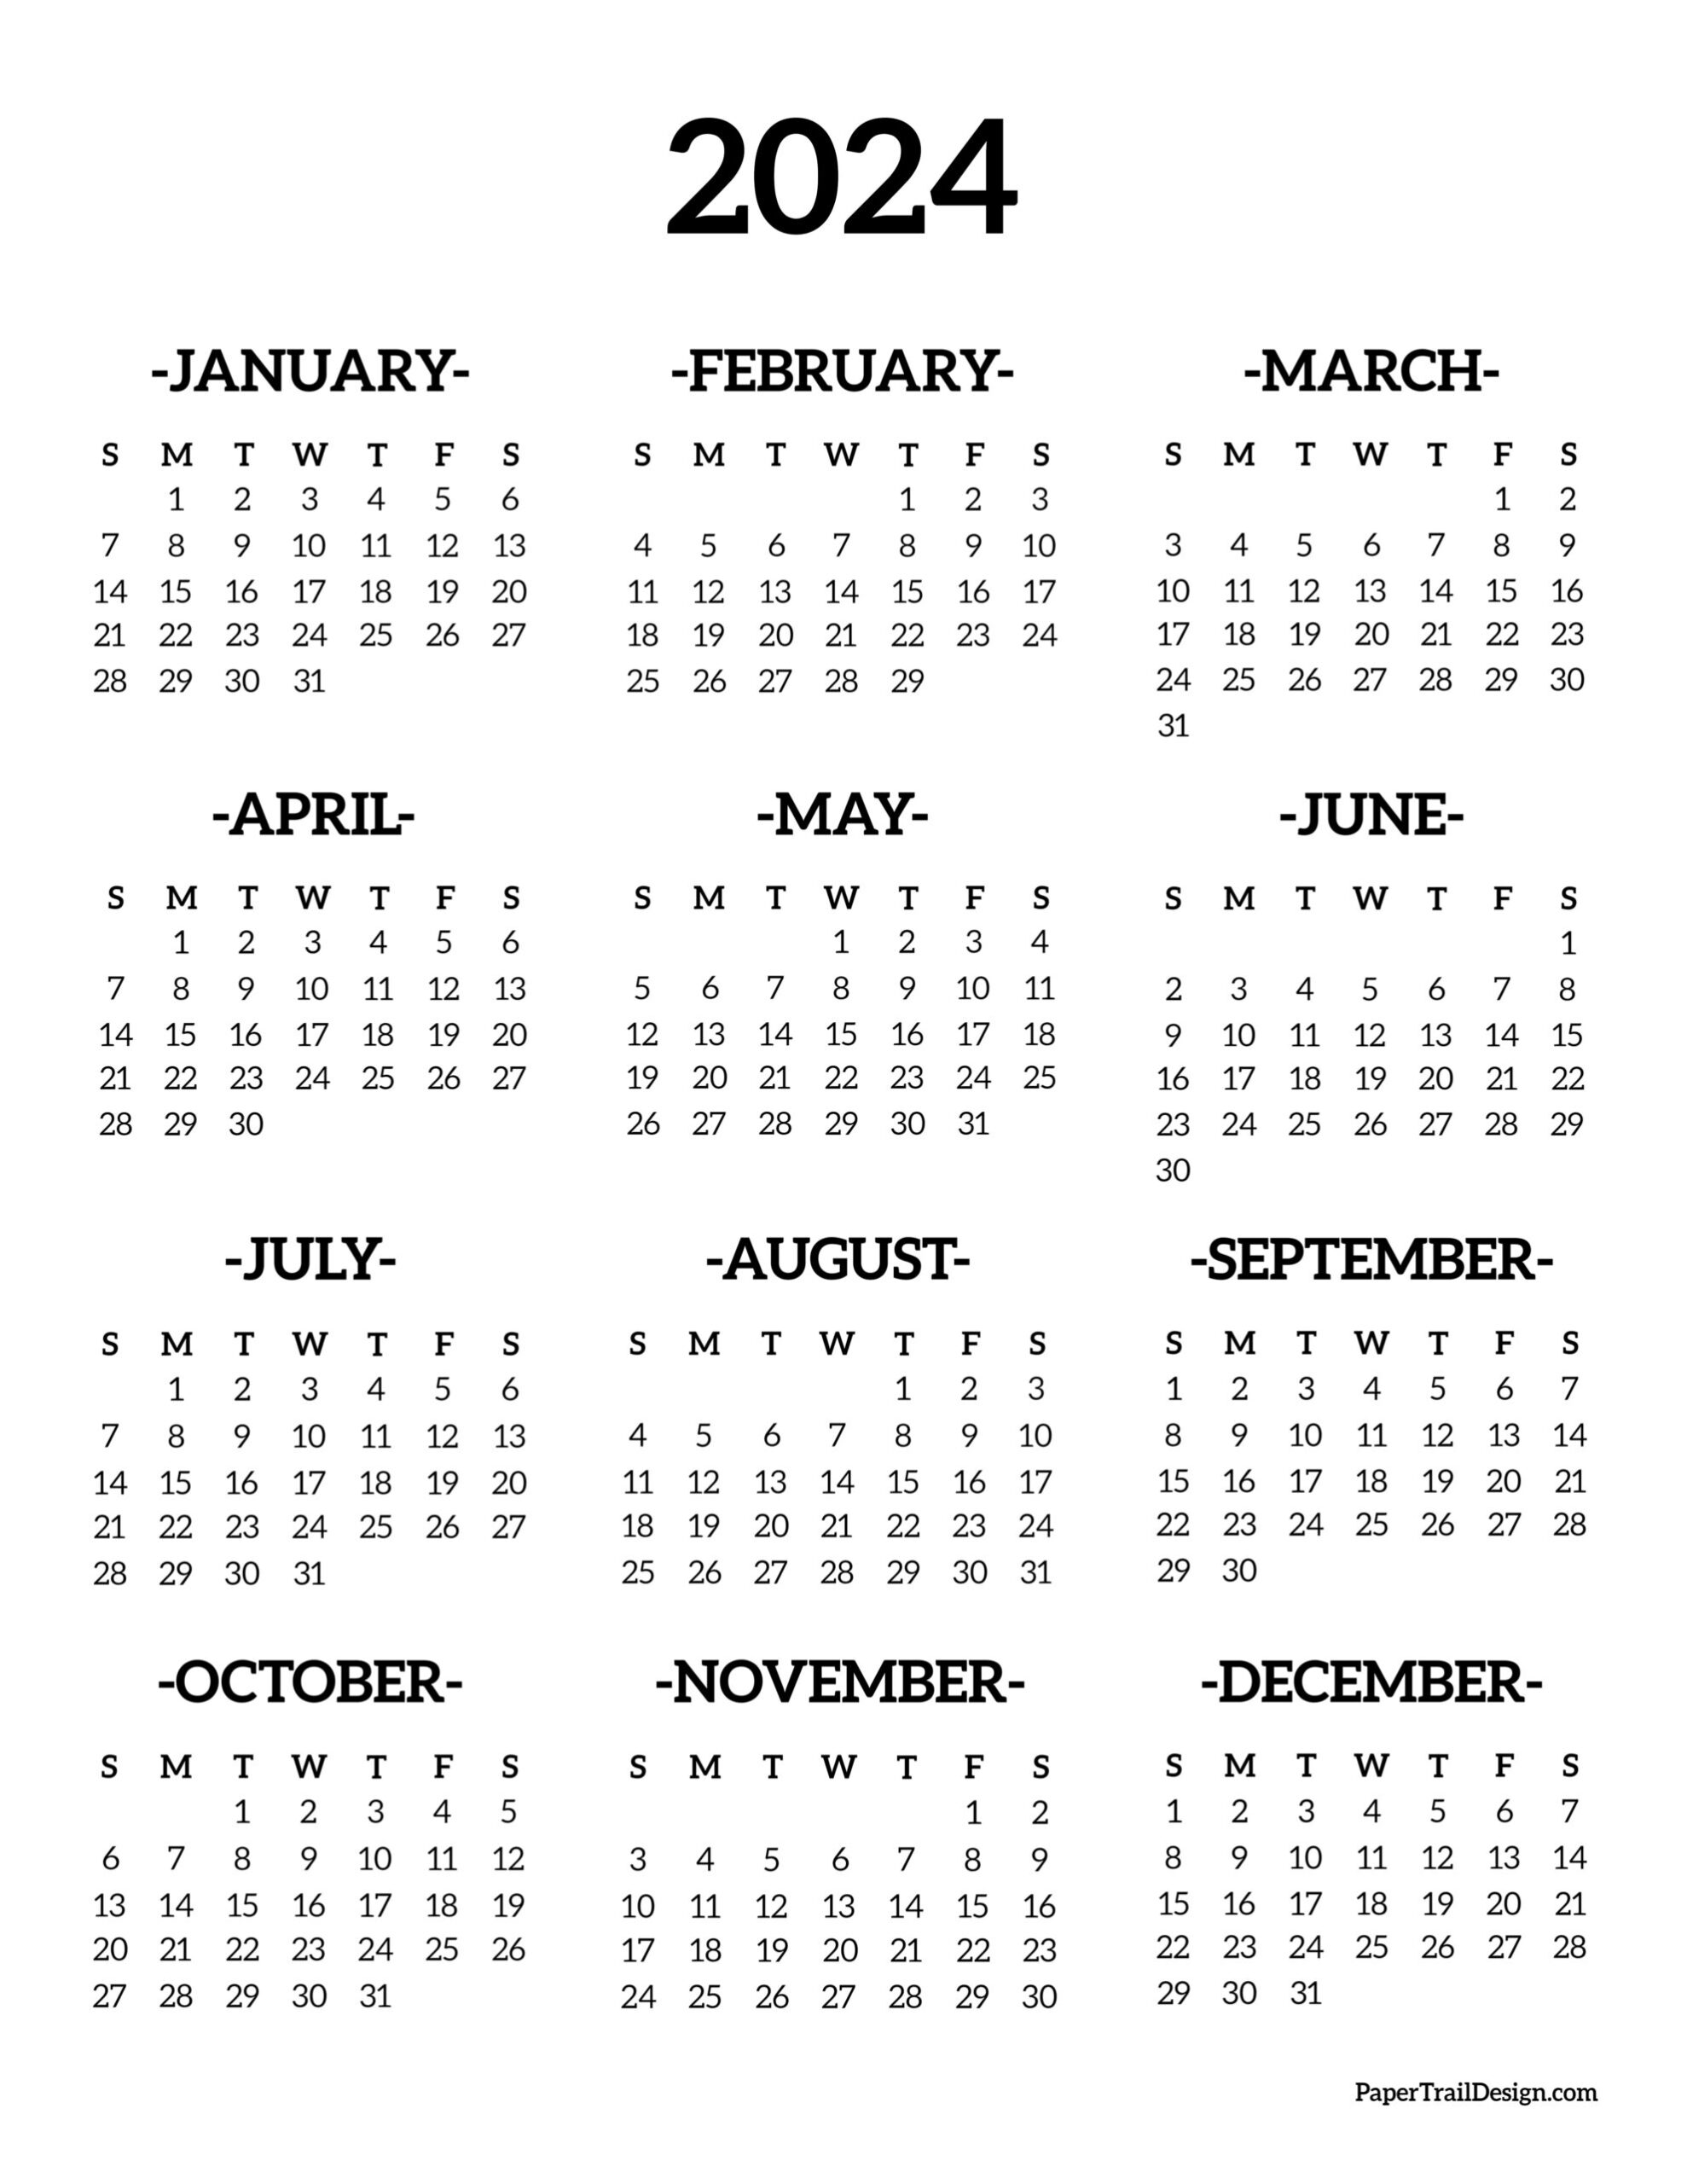 Calendar 2024 Printable One Page - Paper Trail Design for 2024 Printable Calendar One Page Free